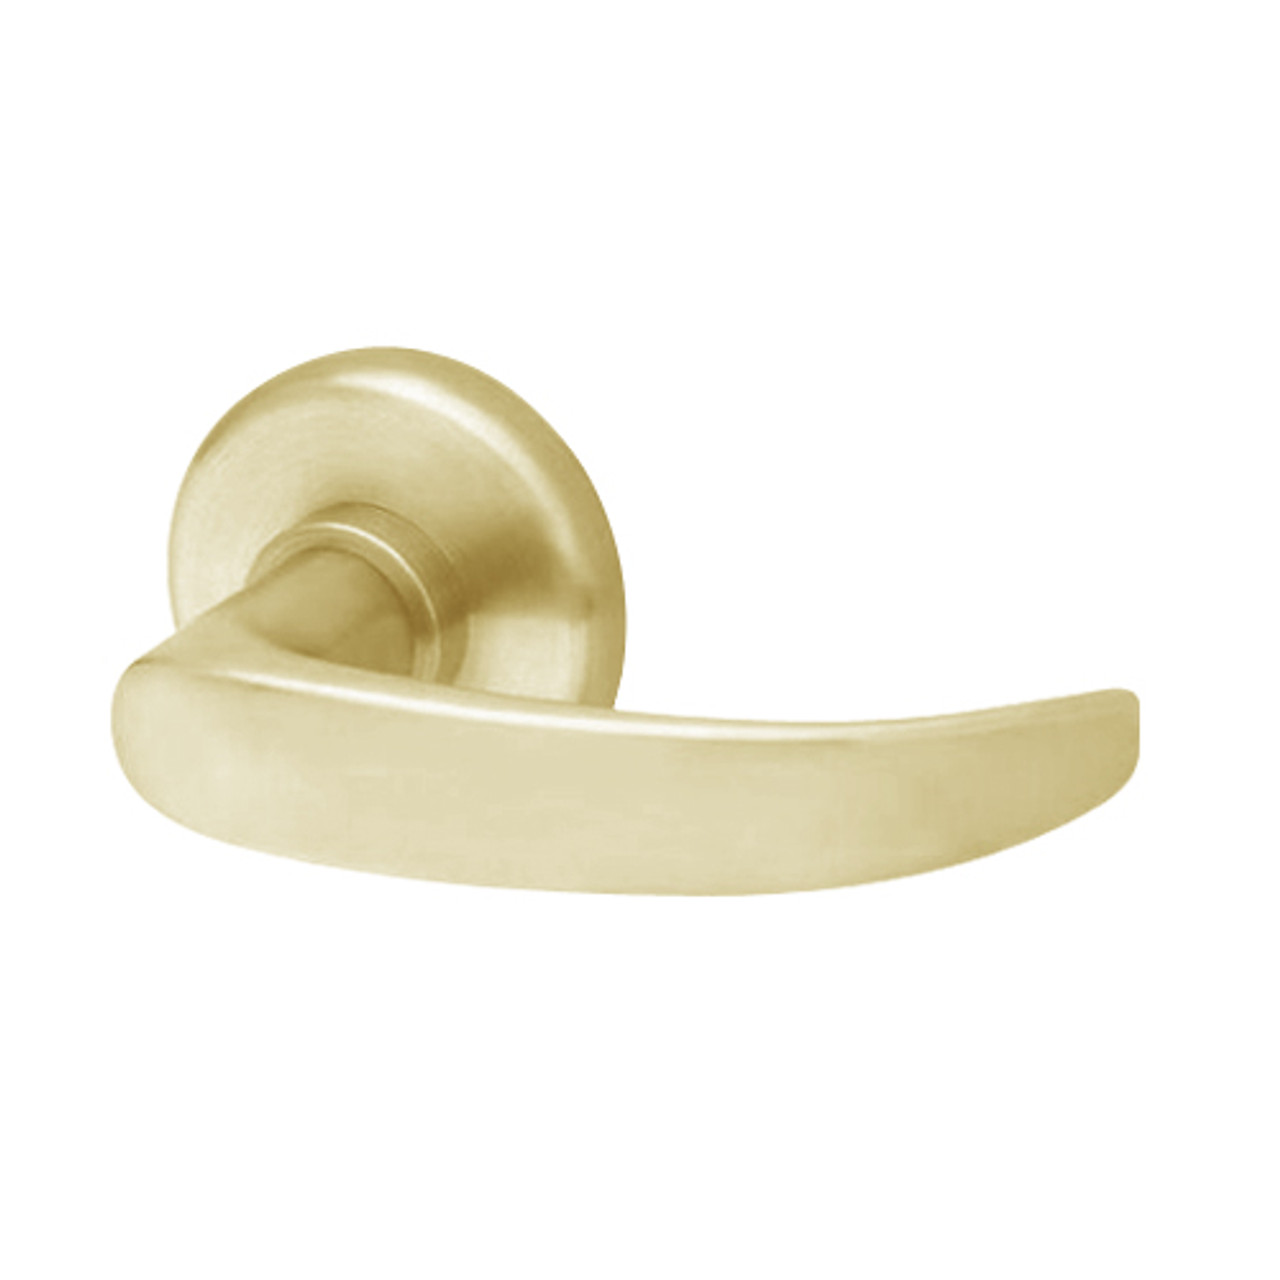 40HTKOS314R606 Best 40H Series Trim Kits Outside Lever w/ Emergency Plate with Curved Return Style in Satin Brass